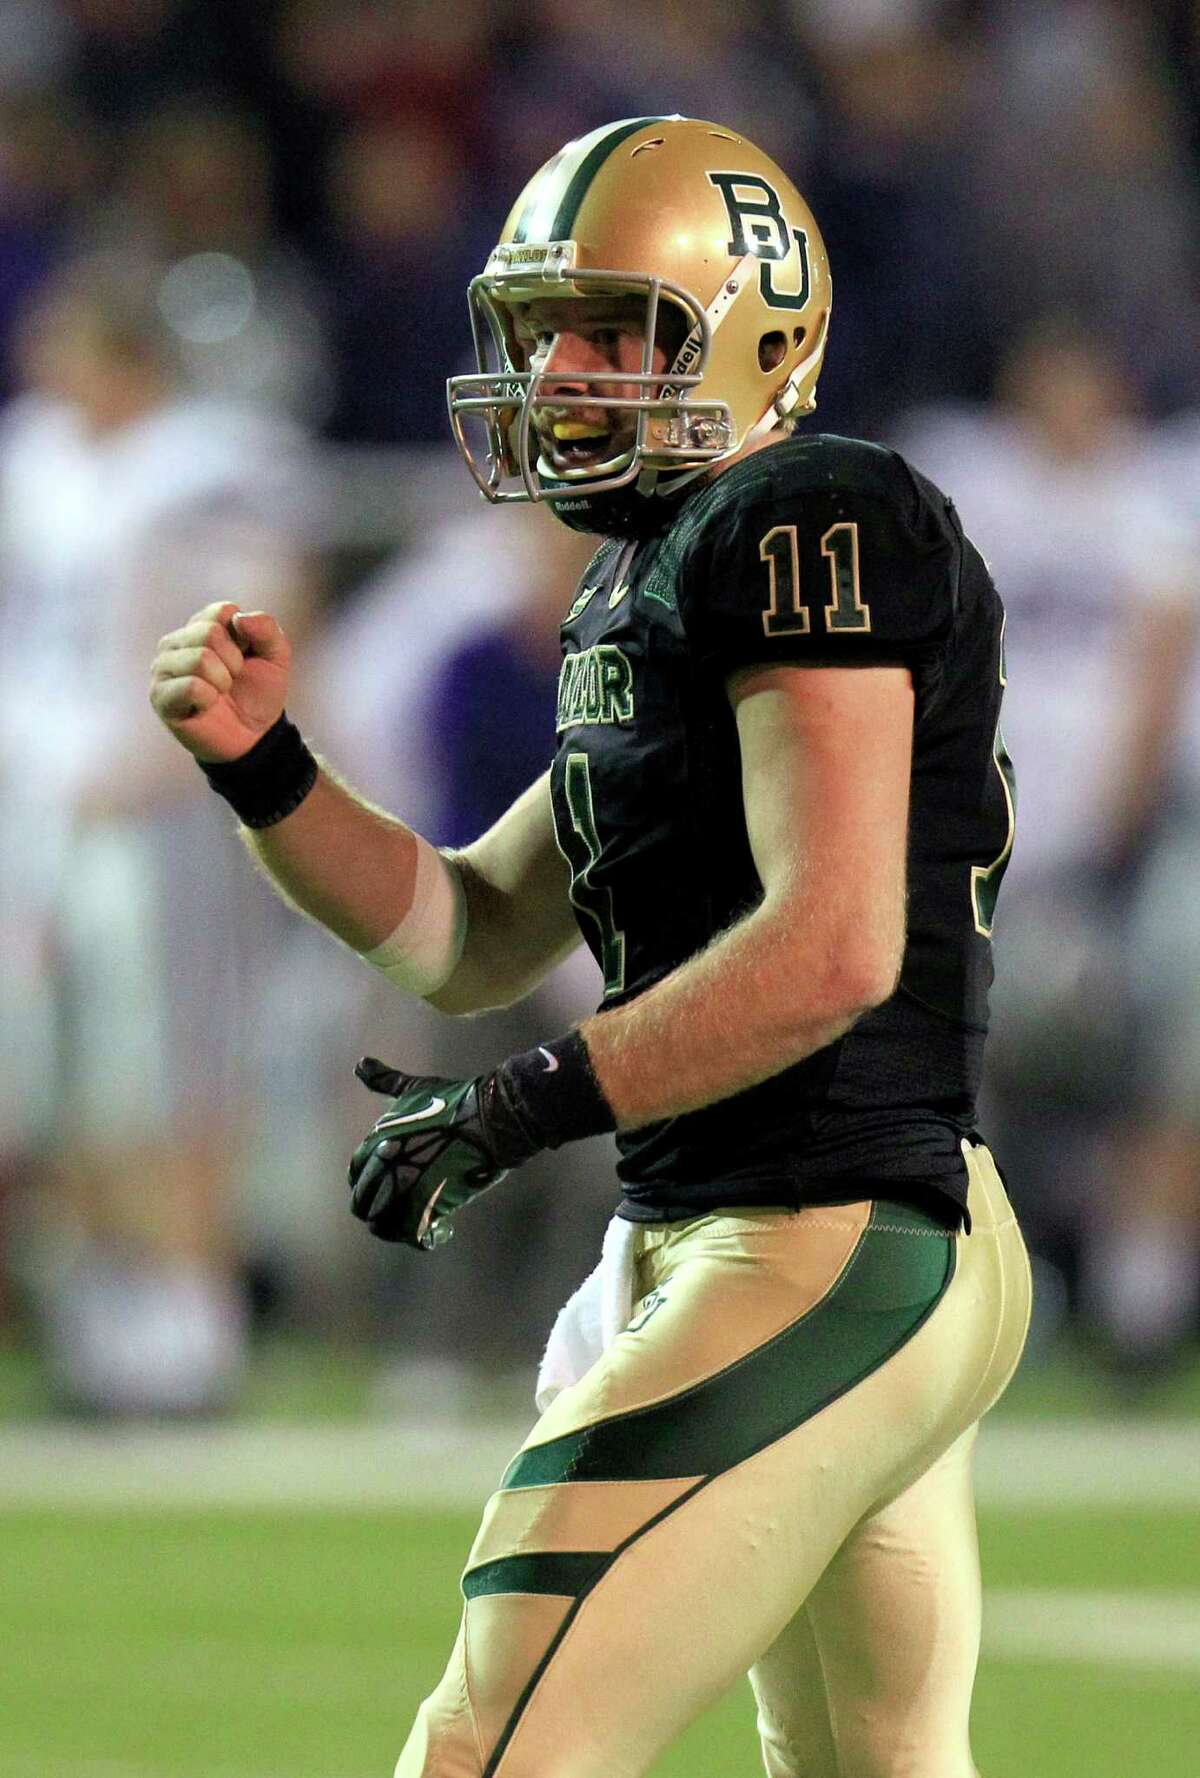 Baylor quarterback Nick Florence (11) celebrates a touchdown during the third quarter for the NCAA college football game against Kansas State, Saturday, Nov. 17, 2012, in Waco Texas. (AP Photo/LM Otero)